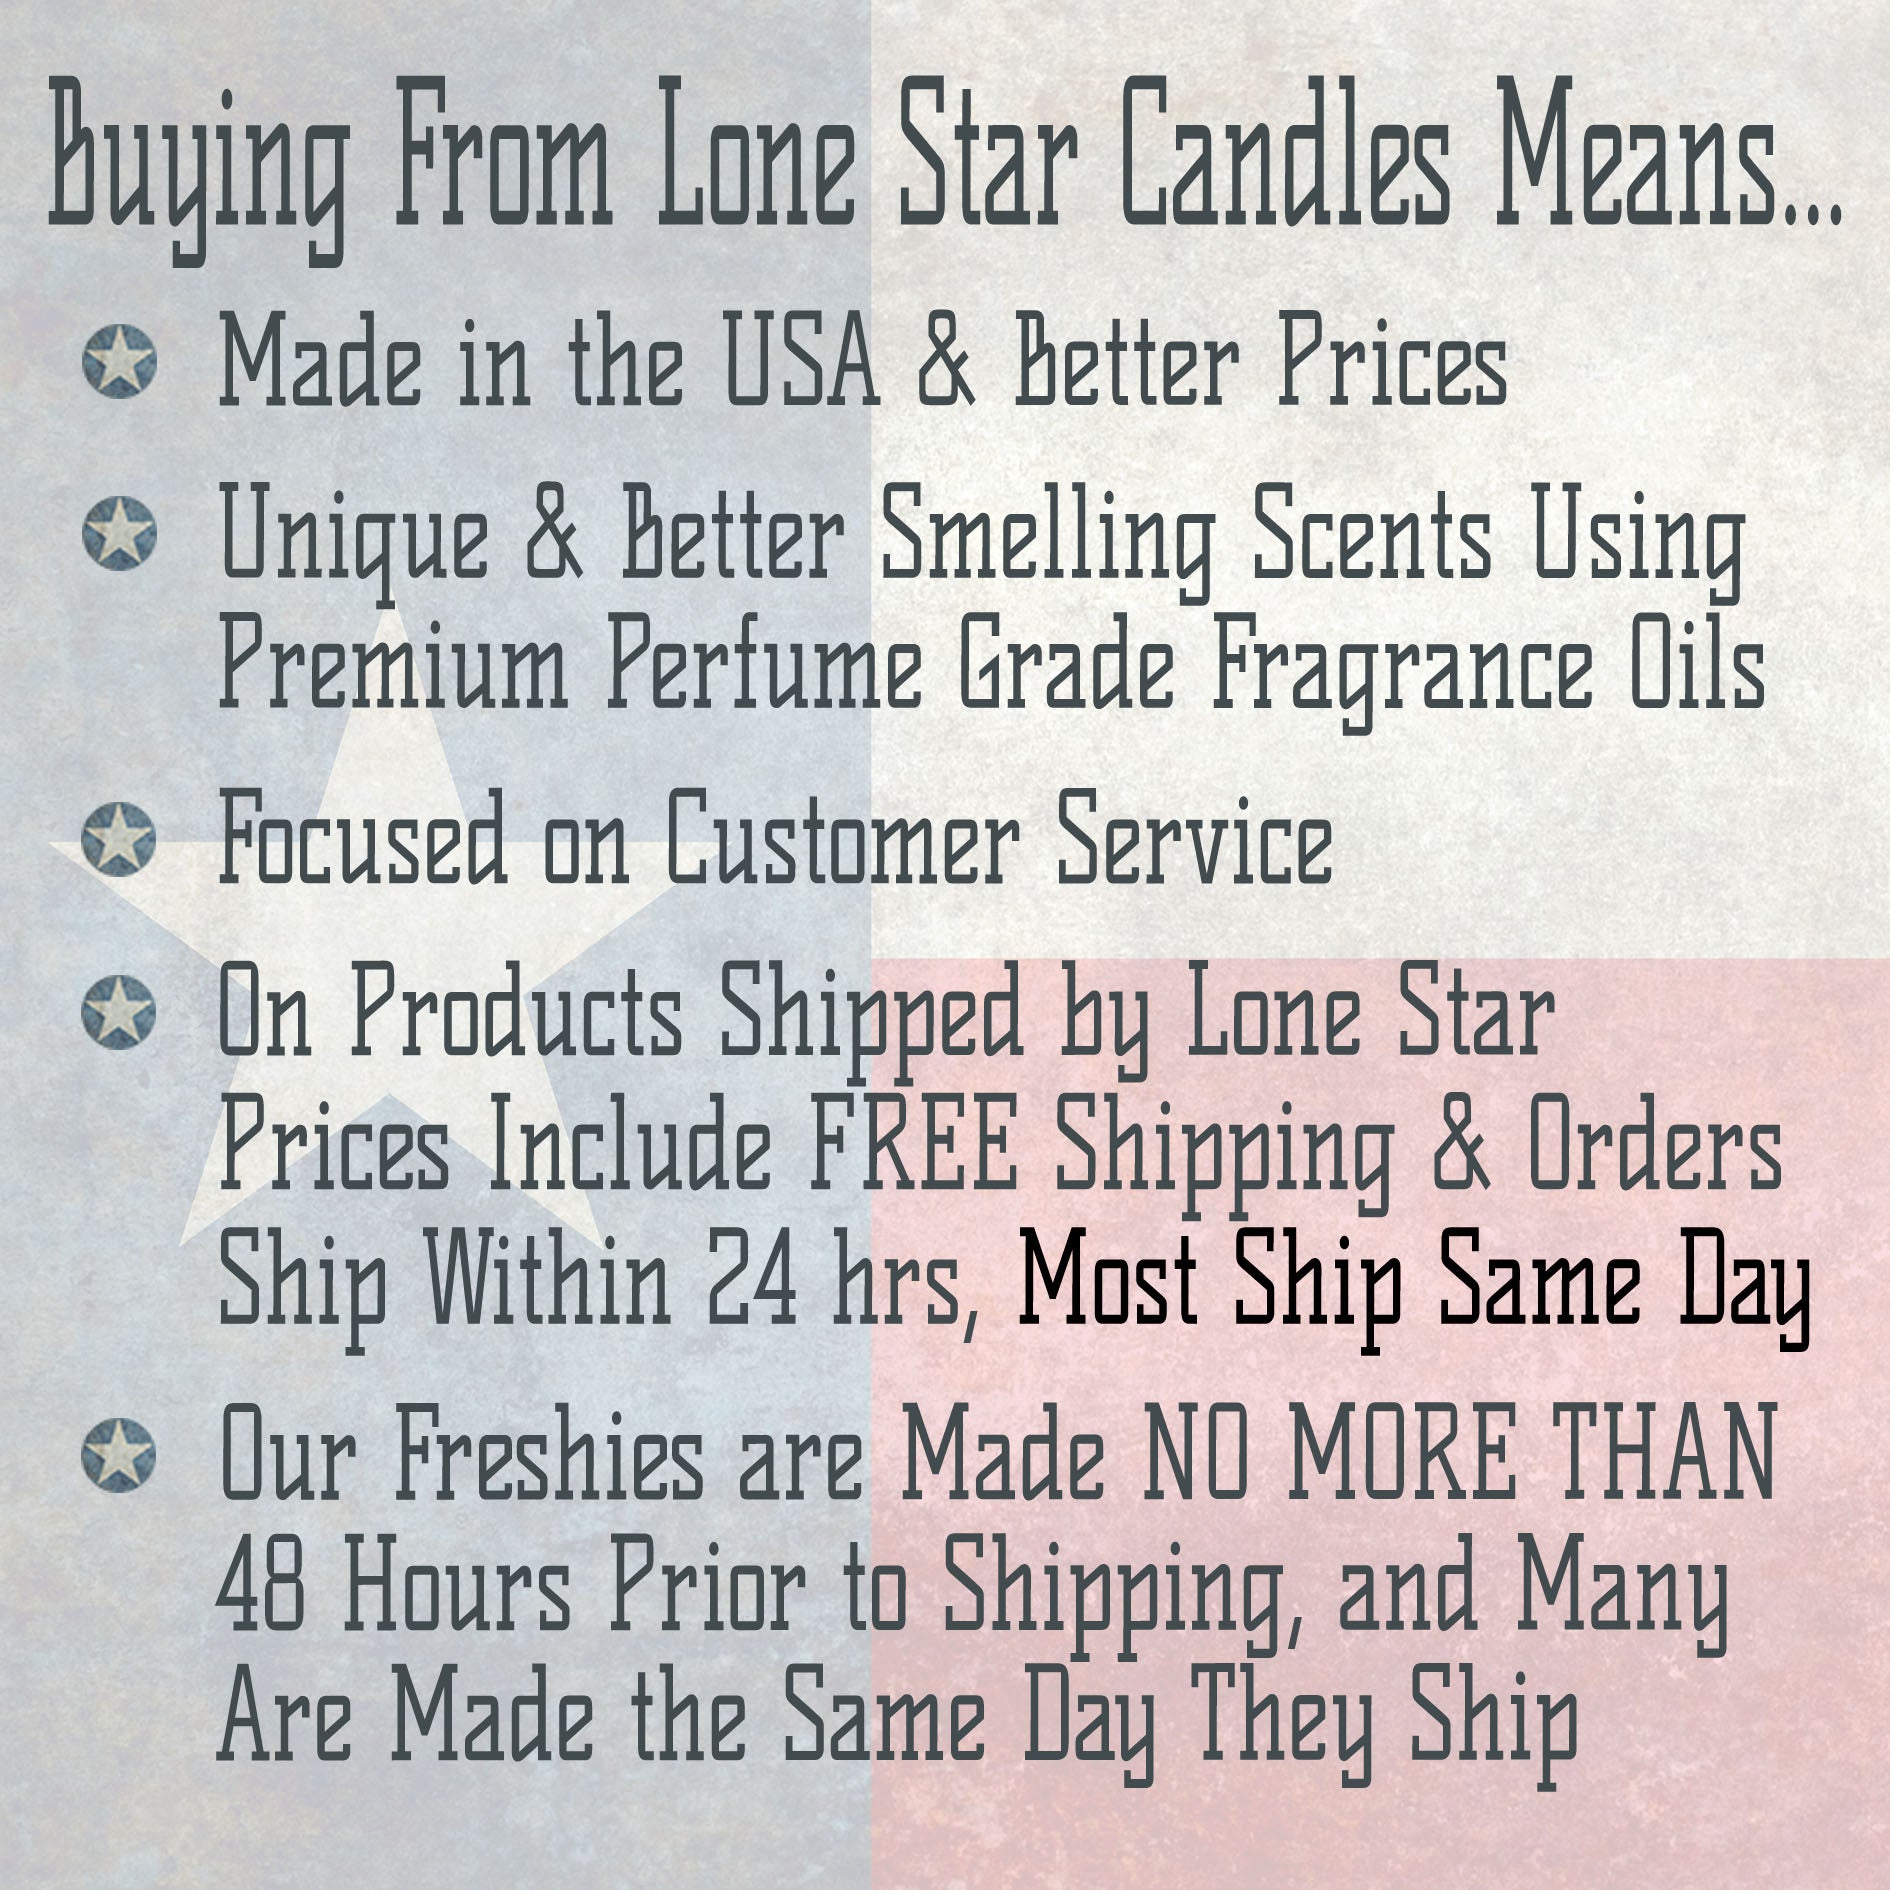 Strawberry Leather, Lone Star Candles & More's Premium Strongly Scented Freshies, Genuine Leather Aroma with Sweet & Juicy Strawberries, Car & Air Freshener, USA Made in Texas, Apple 1-Pack